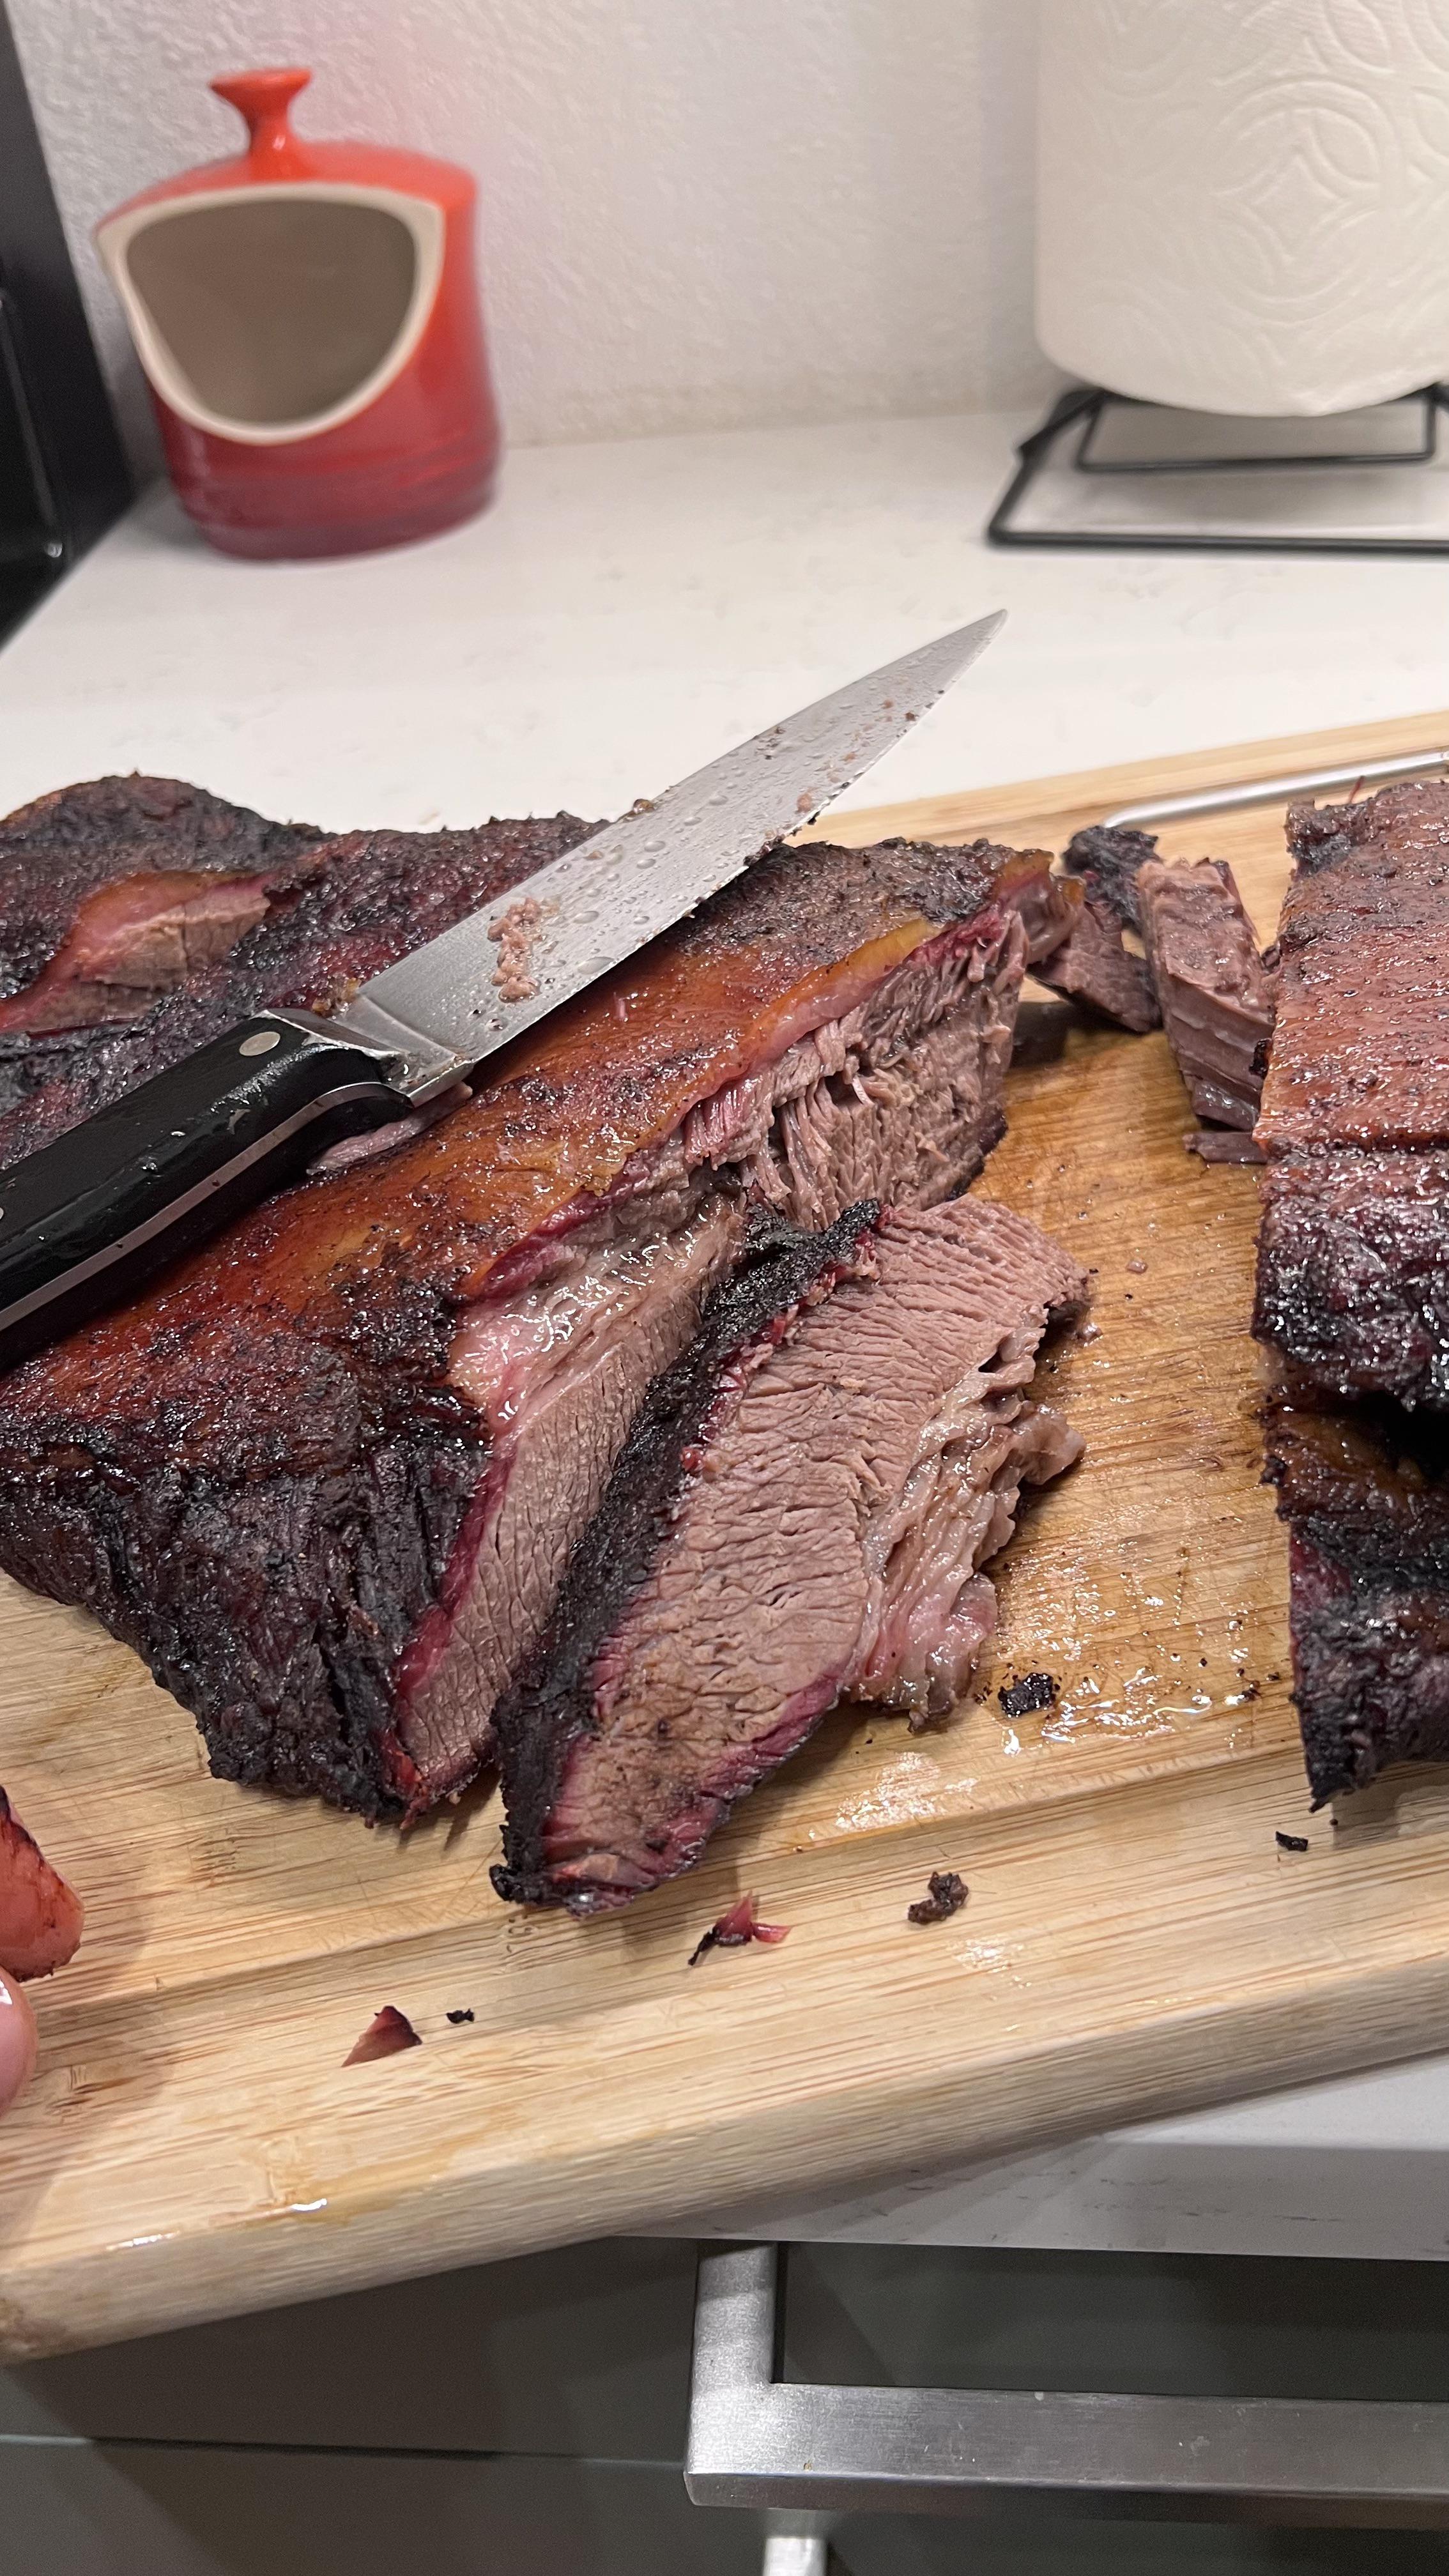 Can You Overcook Brisket: Avoiding BBQ Disasters